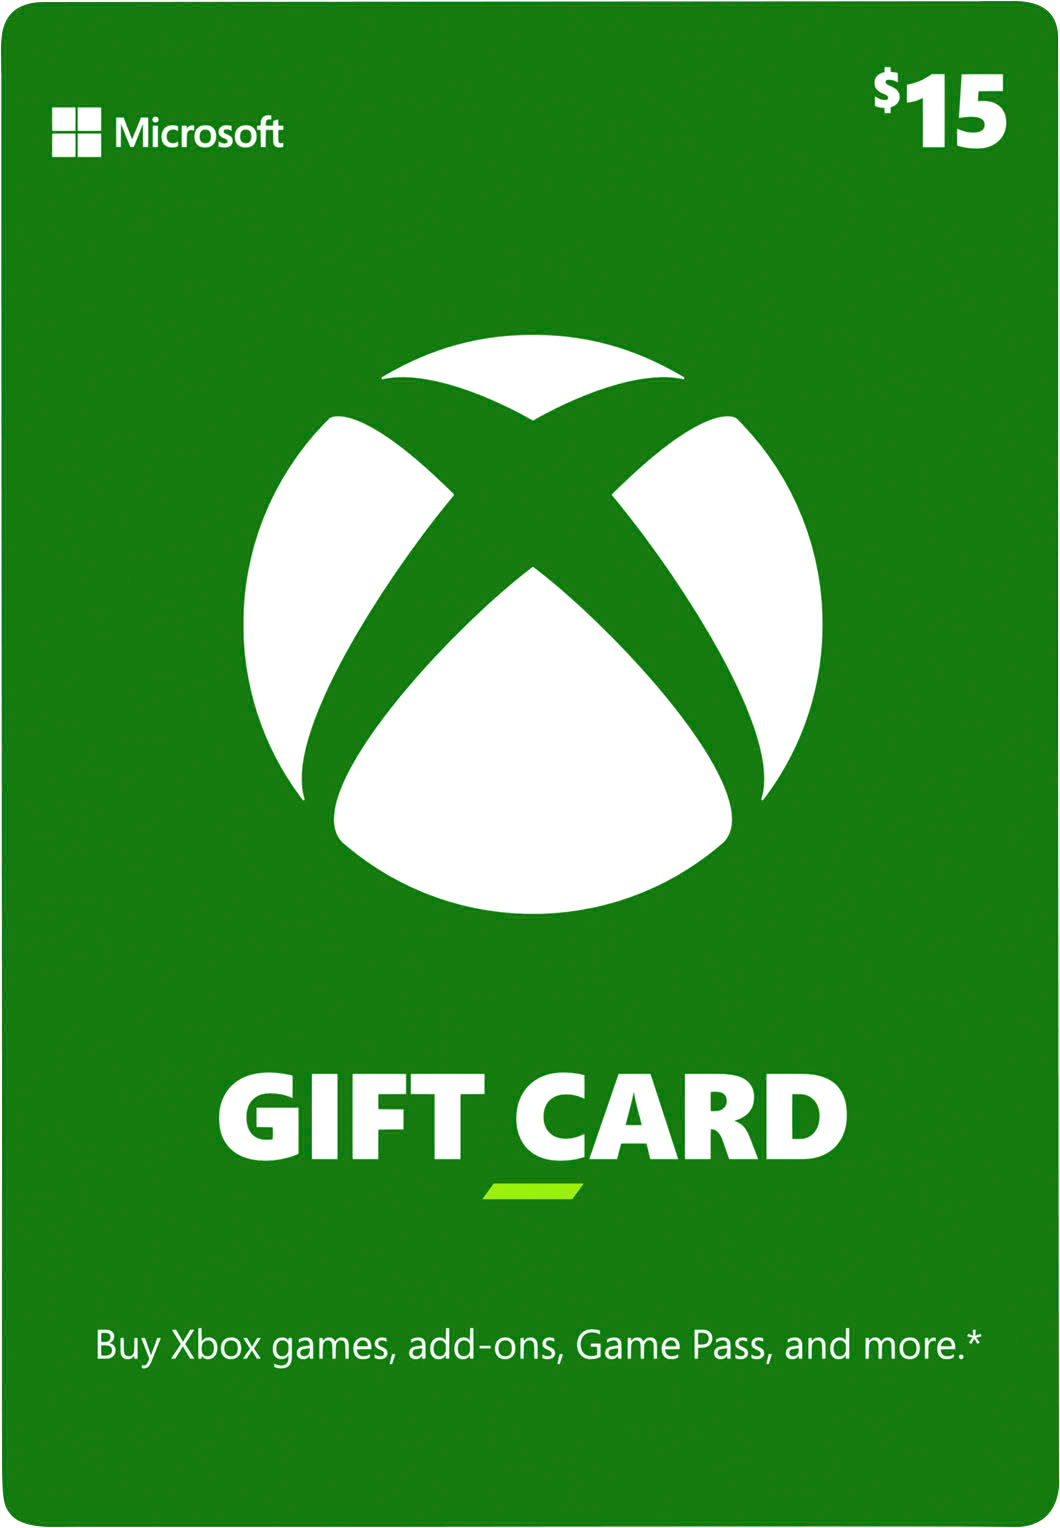 can you use an xbox gift card to buy v bucks